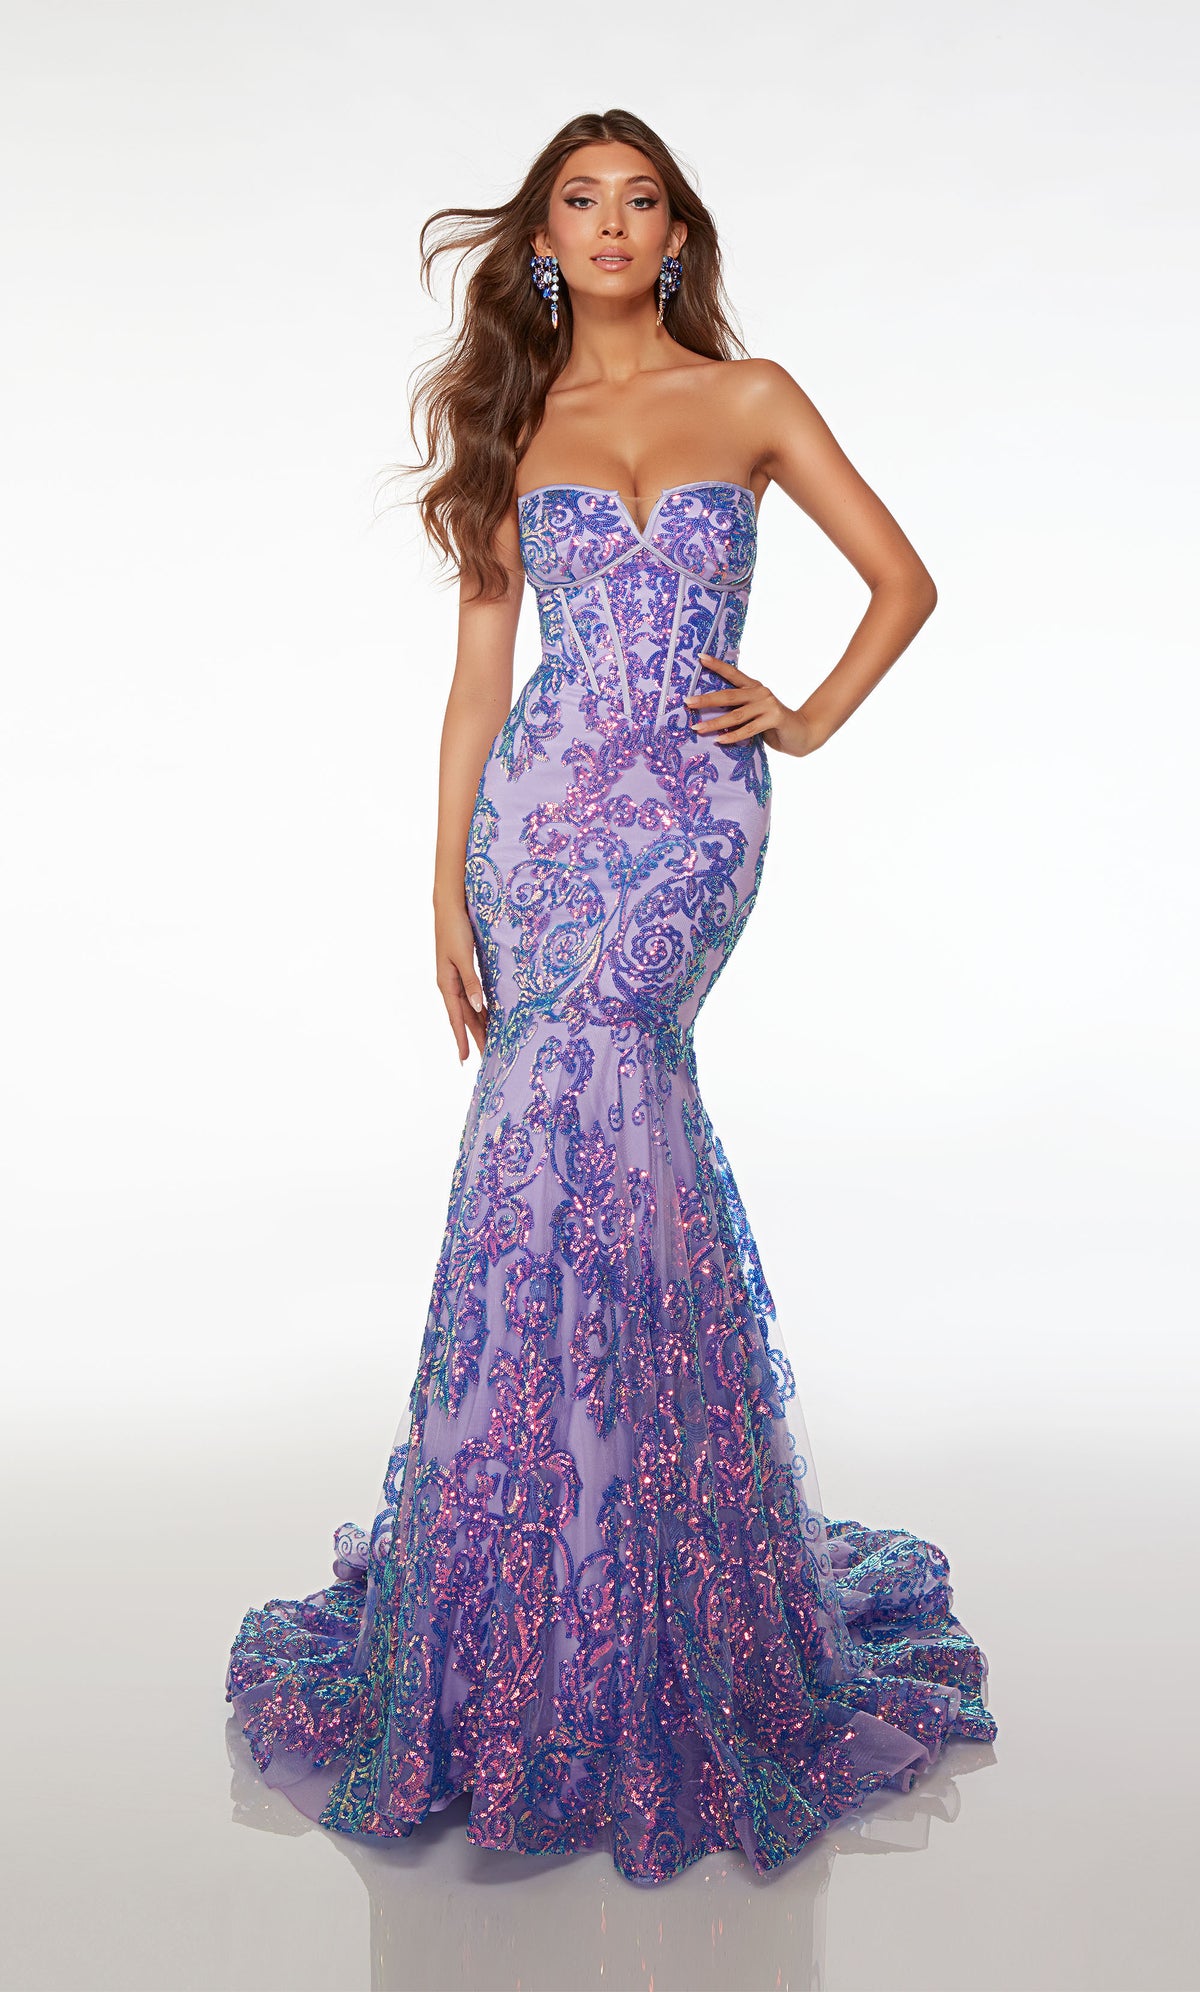 Strapless purple corset dress with paisley-patterned iridescent sequin design, mermaid silhouette, zip-up back, and an graceful train.